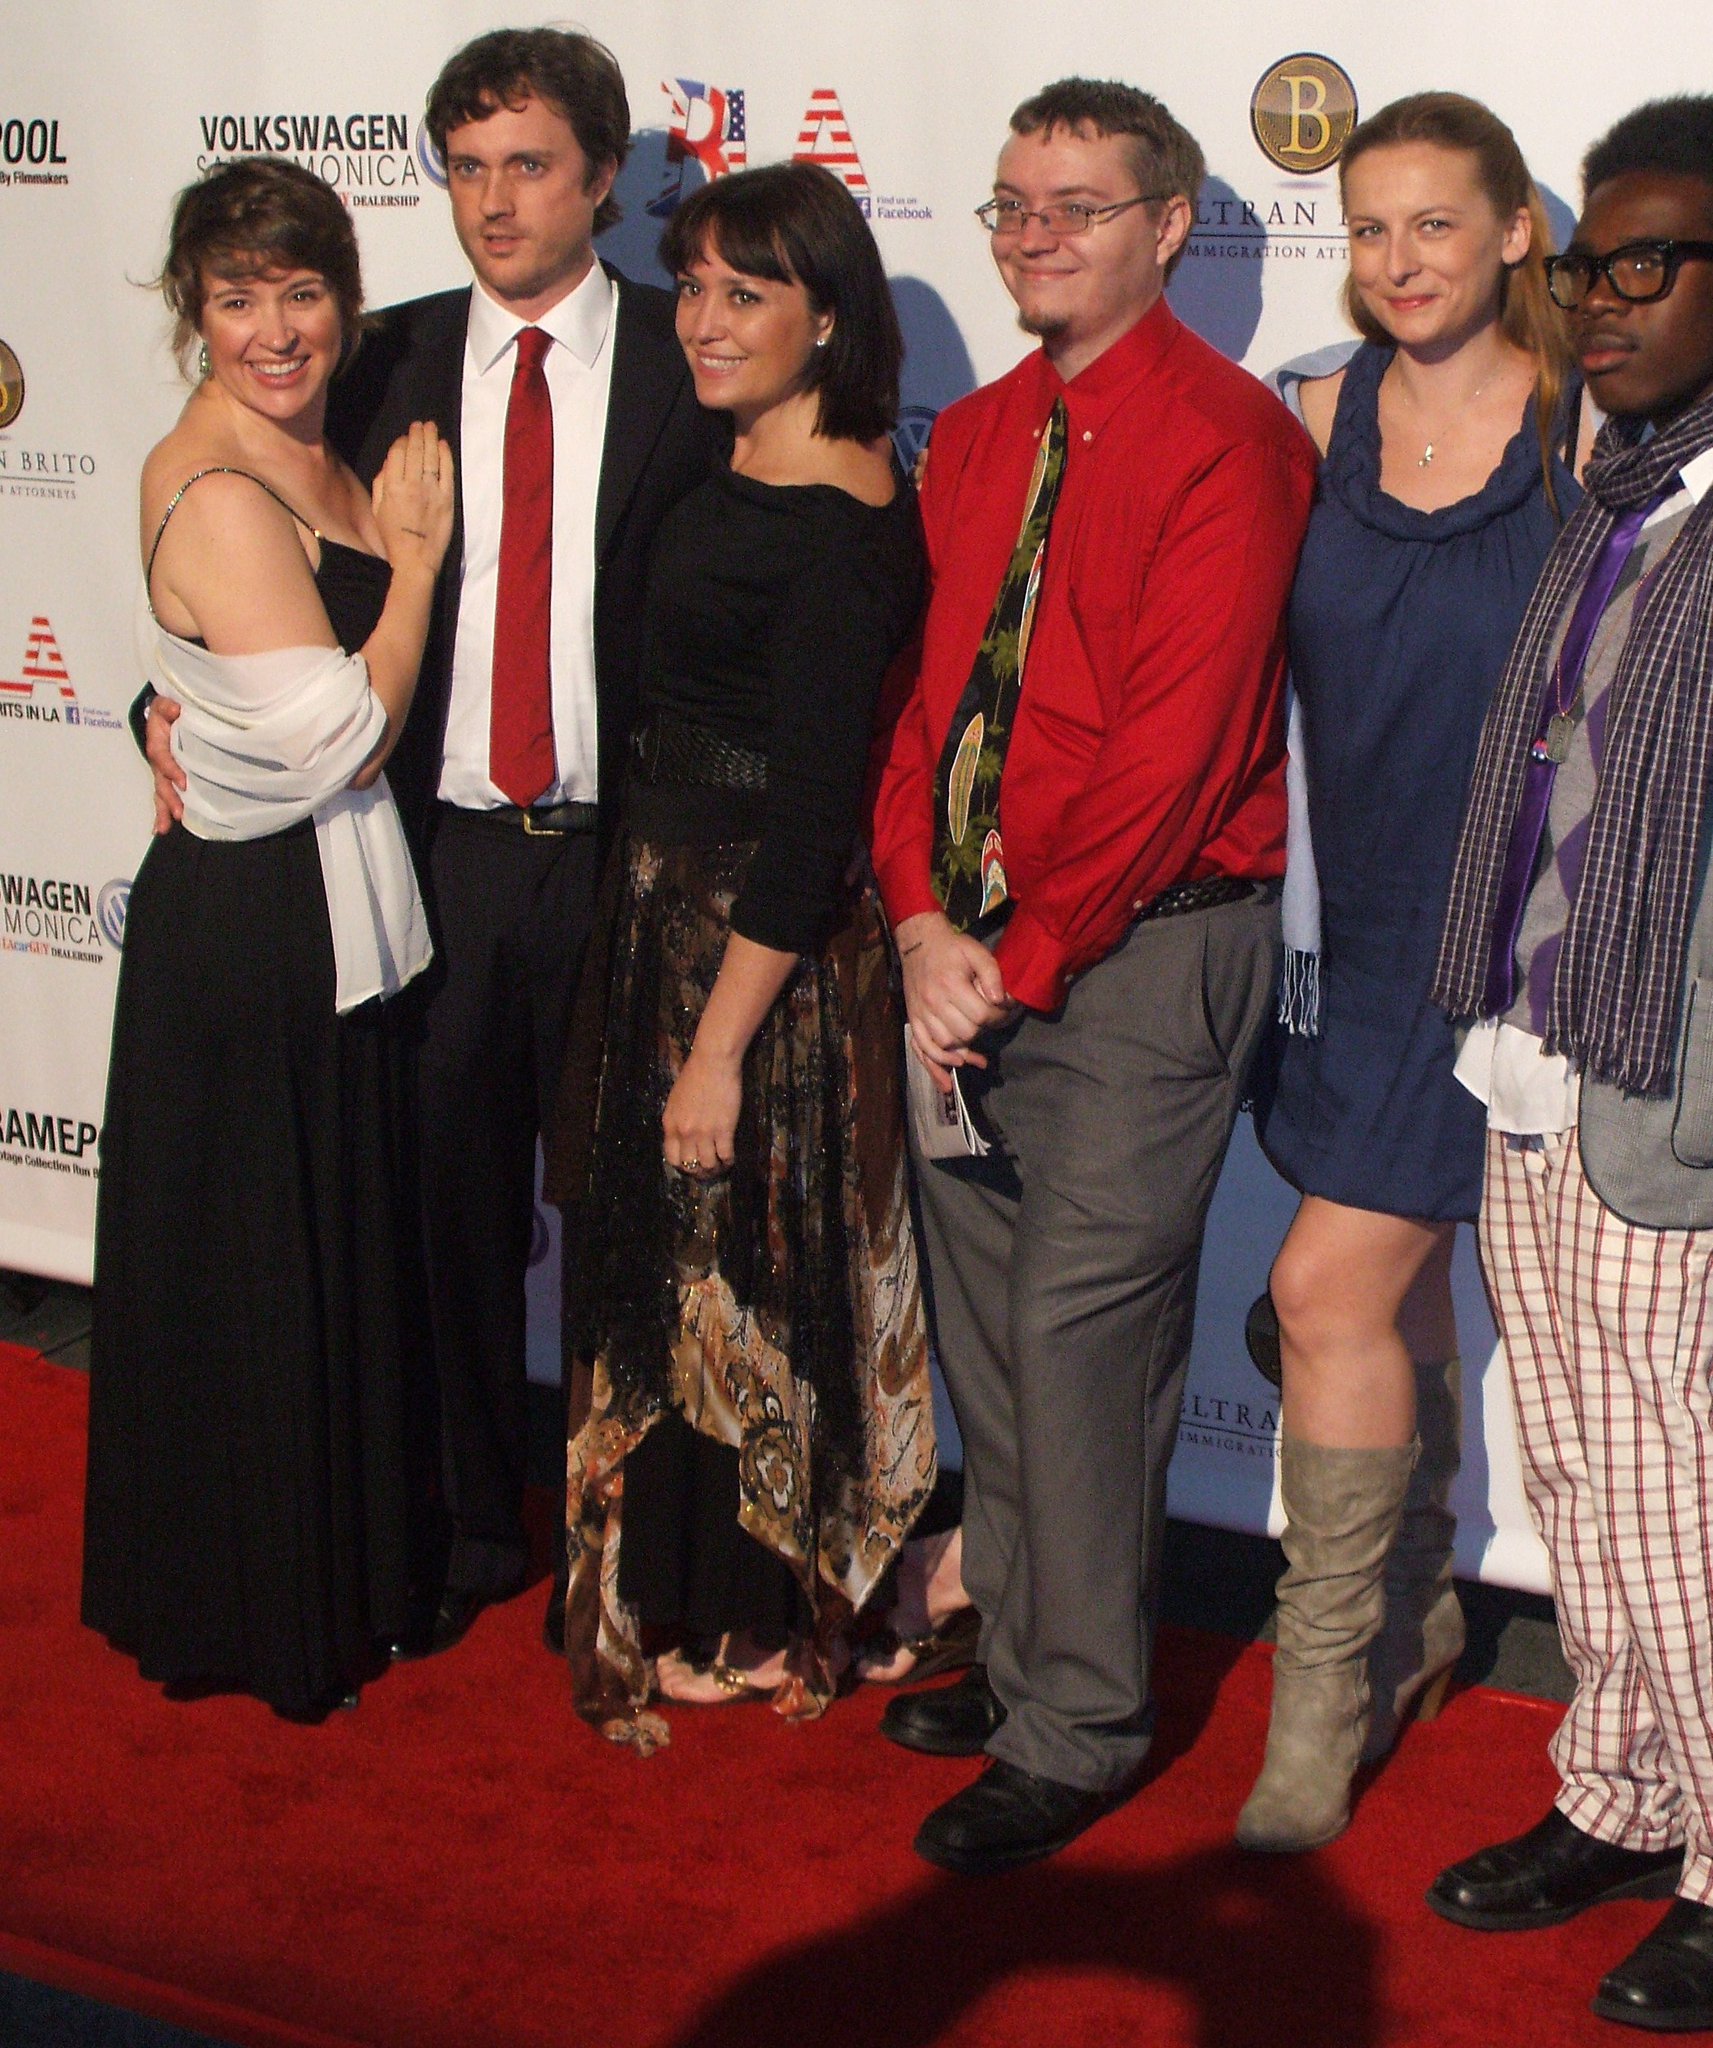 On the red carpet for the 2011 Toscars film festival.